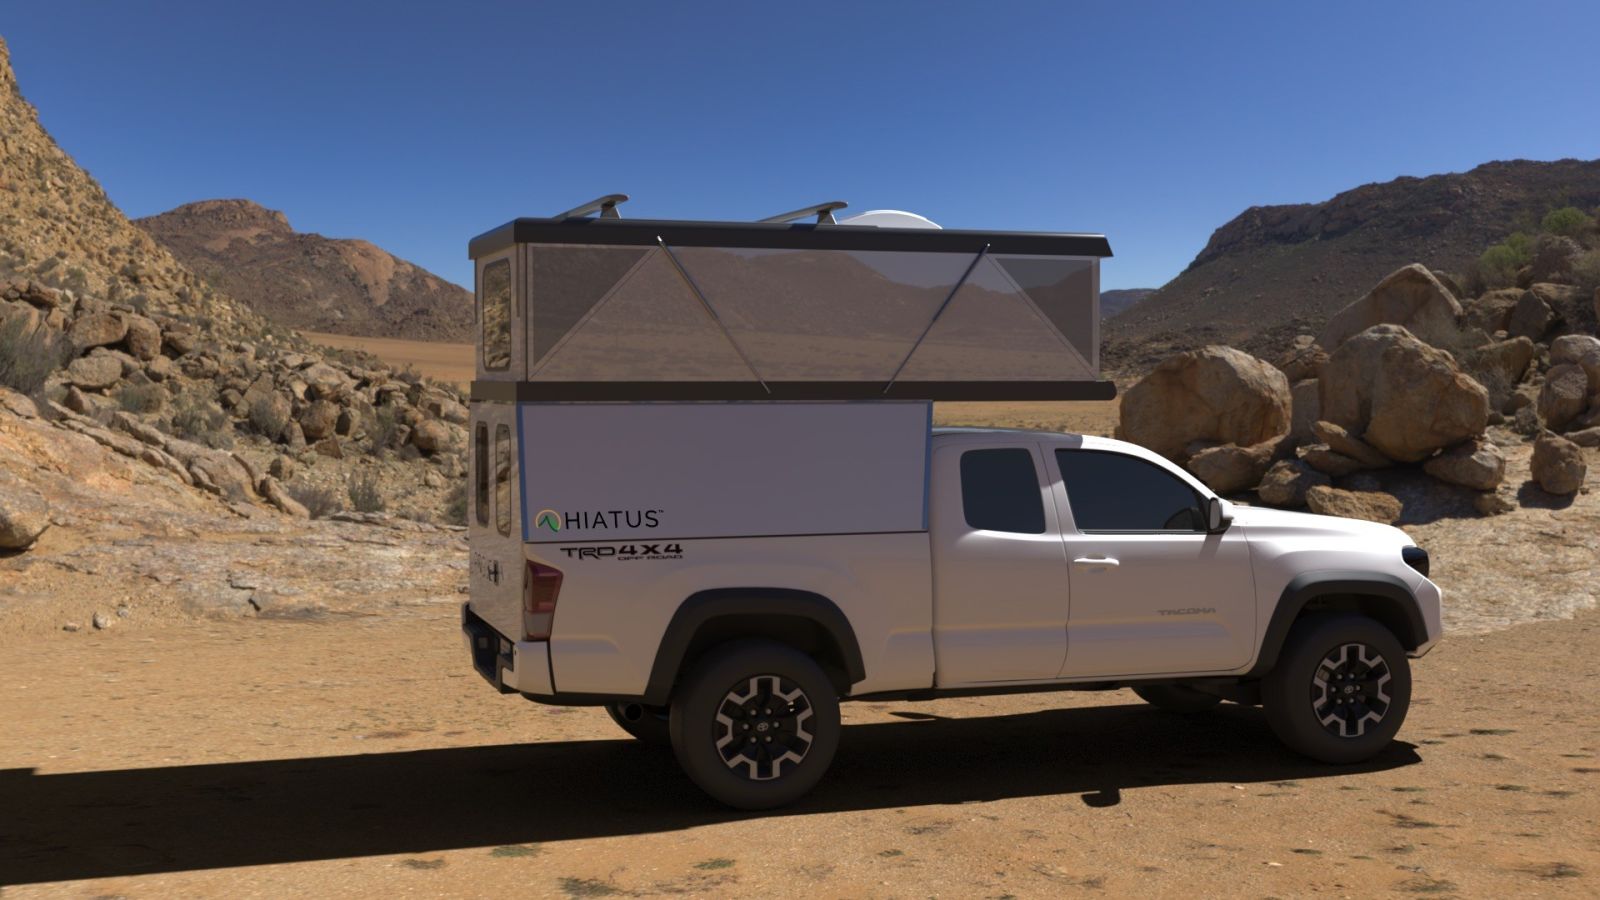 hiatus campers serves off road adventurers with one machine and it s all we need 3